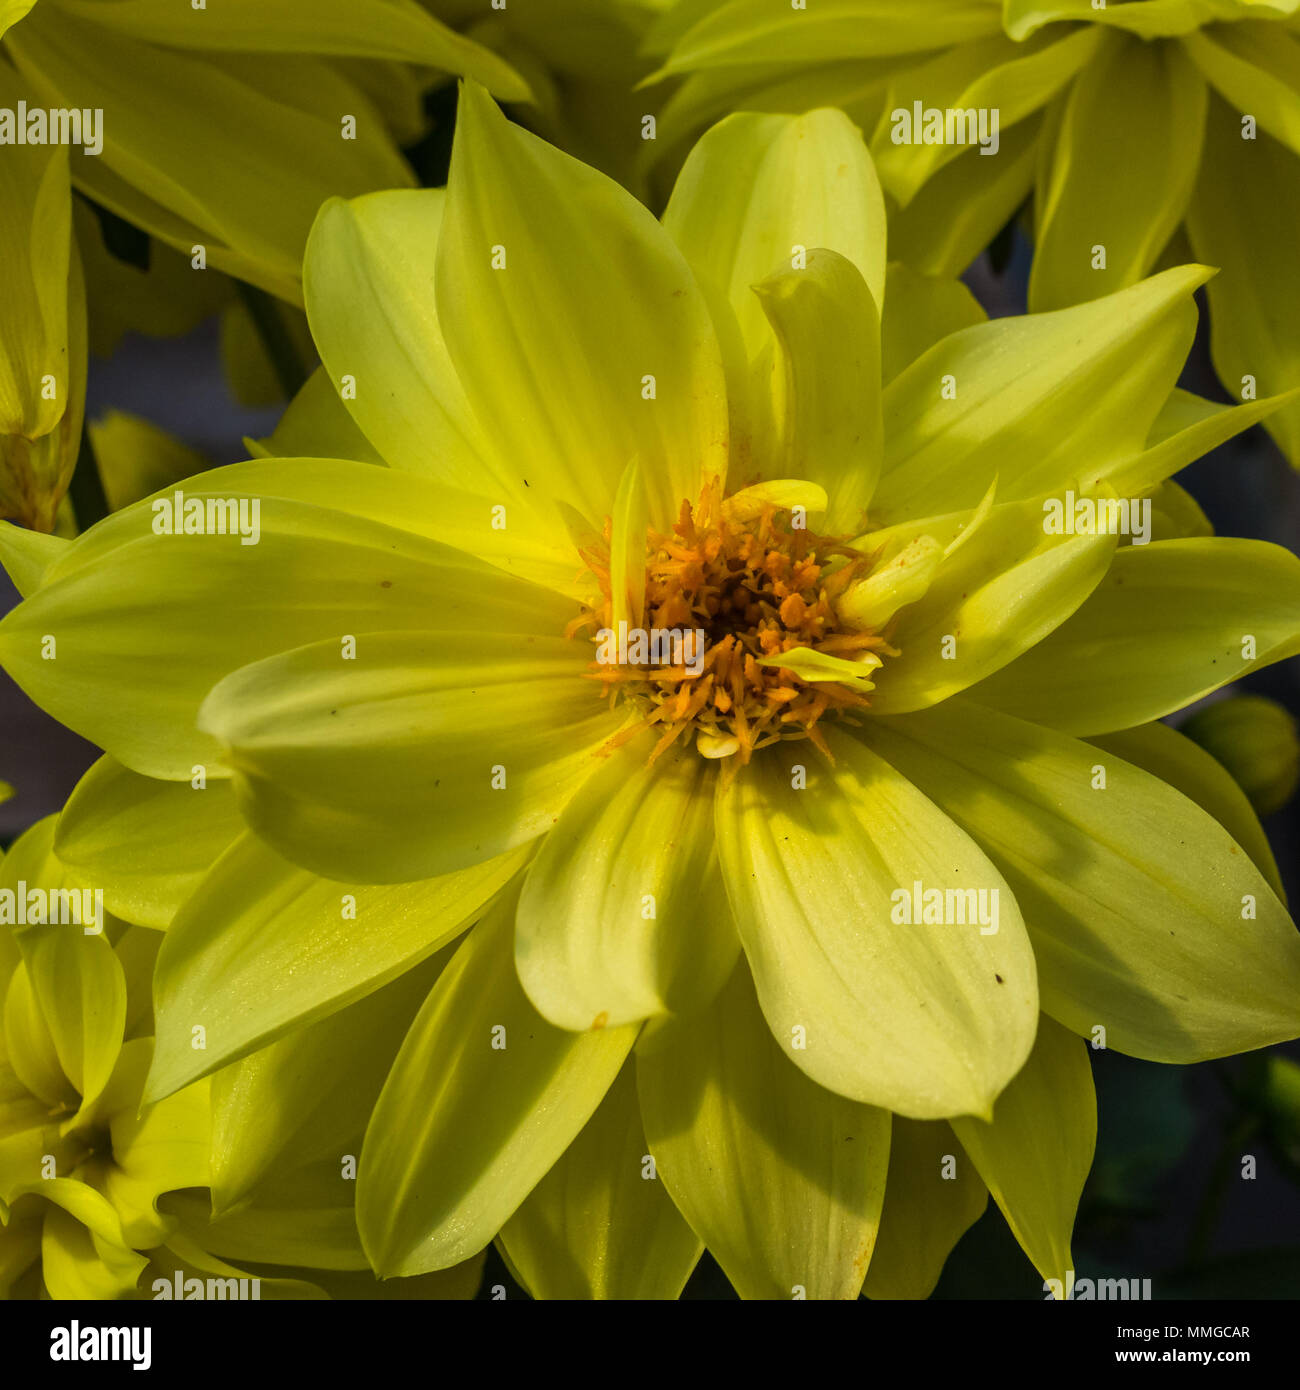 Close up view of common dahlia flower showing vibrant and vivid colors and flower plants Stock Photo